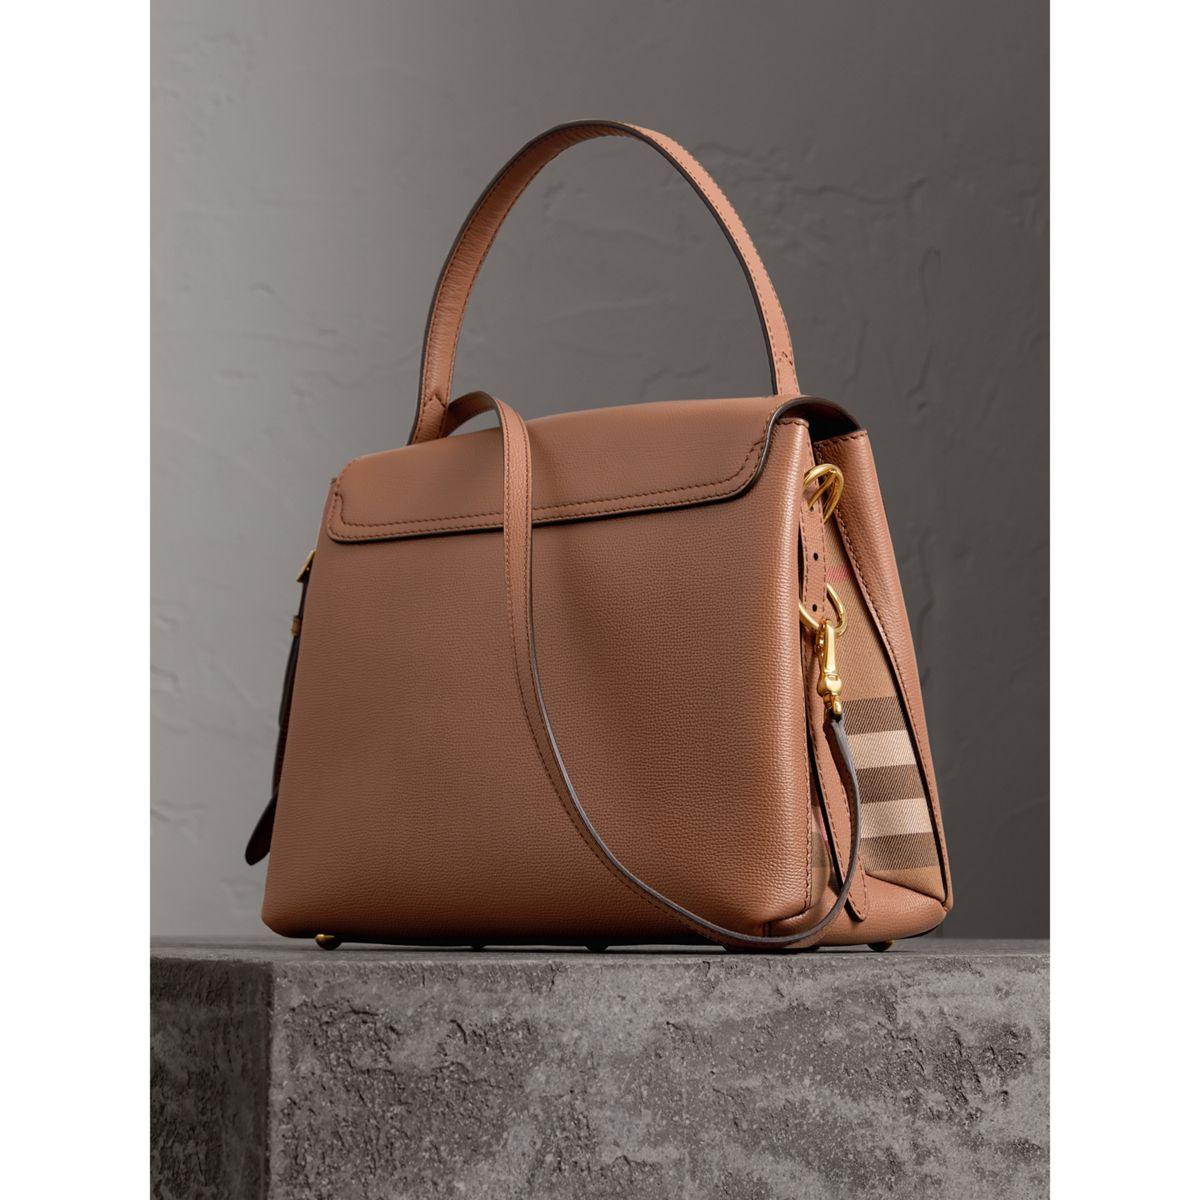 Burberry Small Grainy Leather And House Check Tote Bag | in Dark Sand (Brown) - Lyst